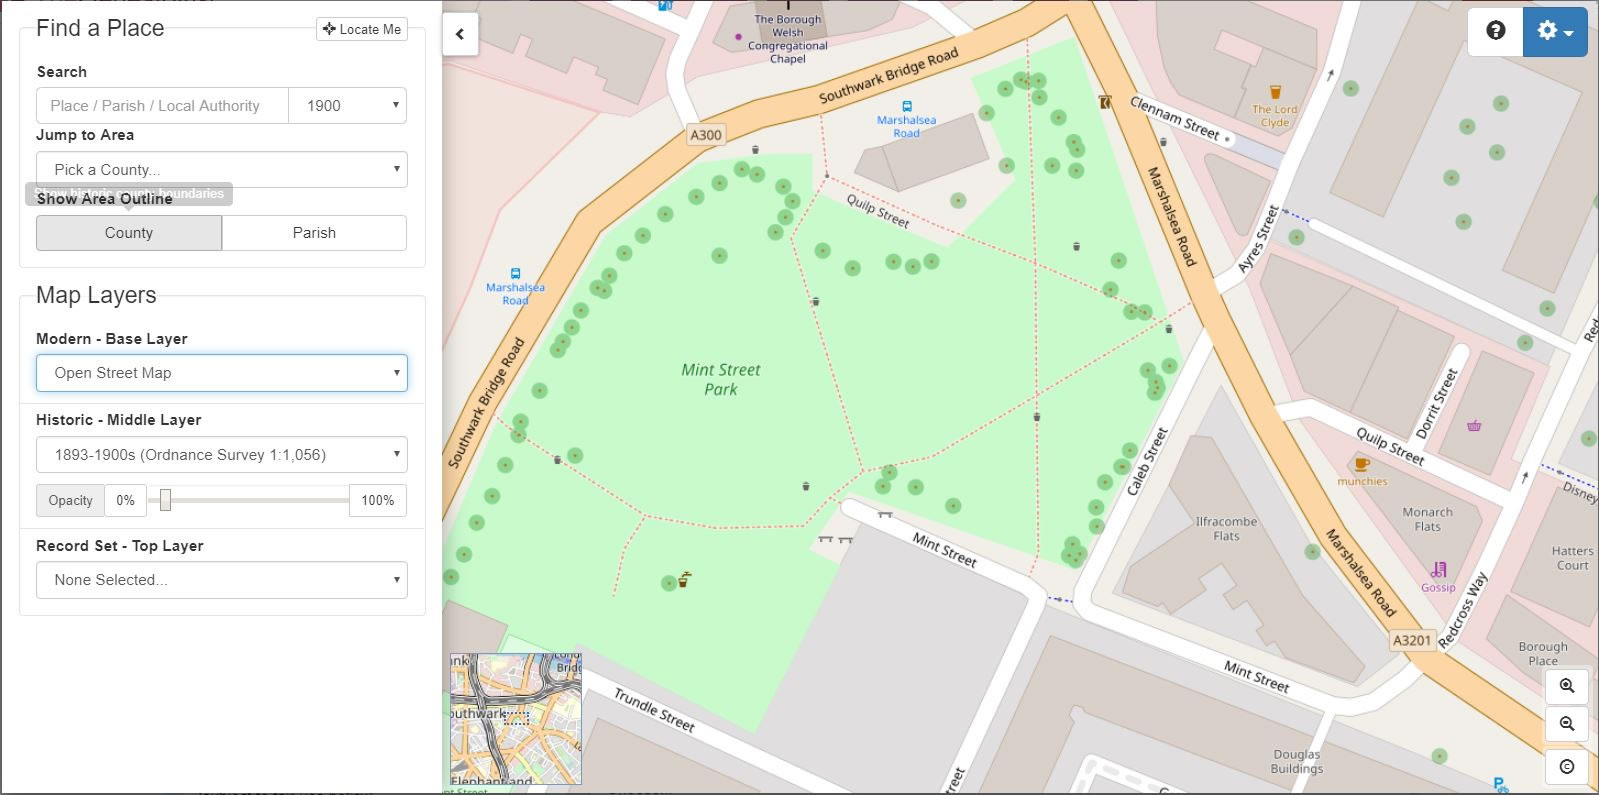 Sliding the opacity control reveals on the modern map that the workhouse site has given way to Mint Street Park